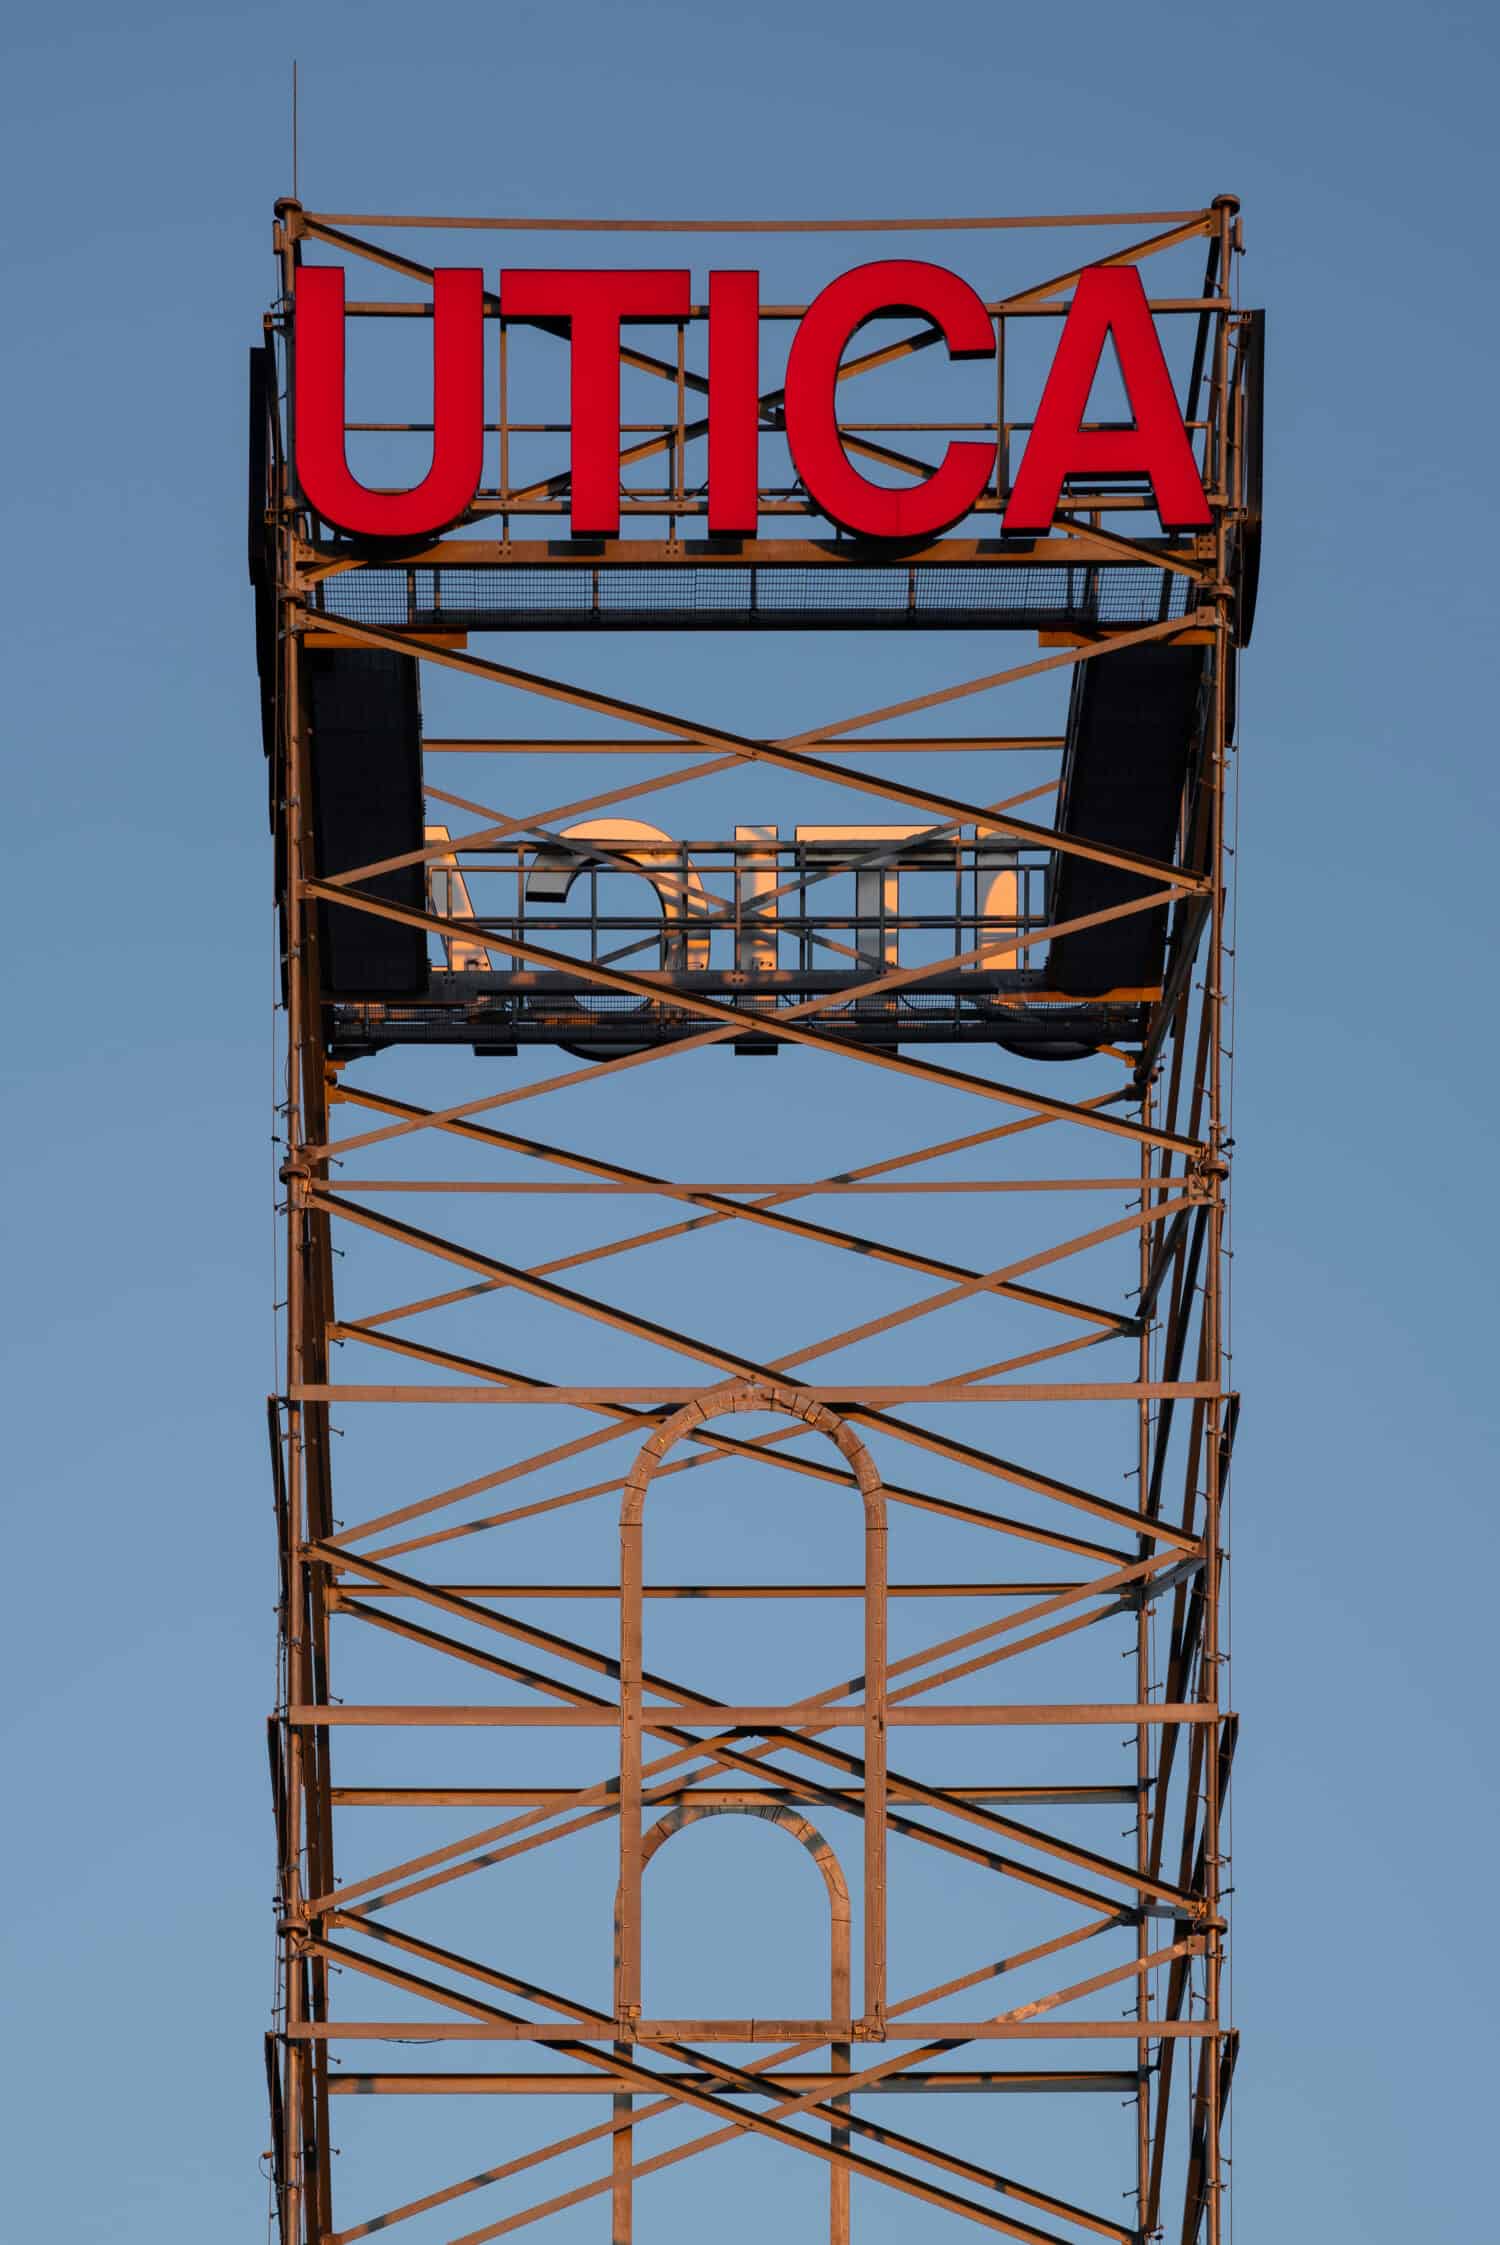 Utica City Tower Picture with Utica Sign in Red.